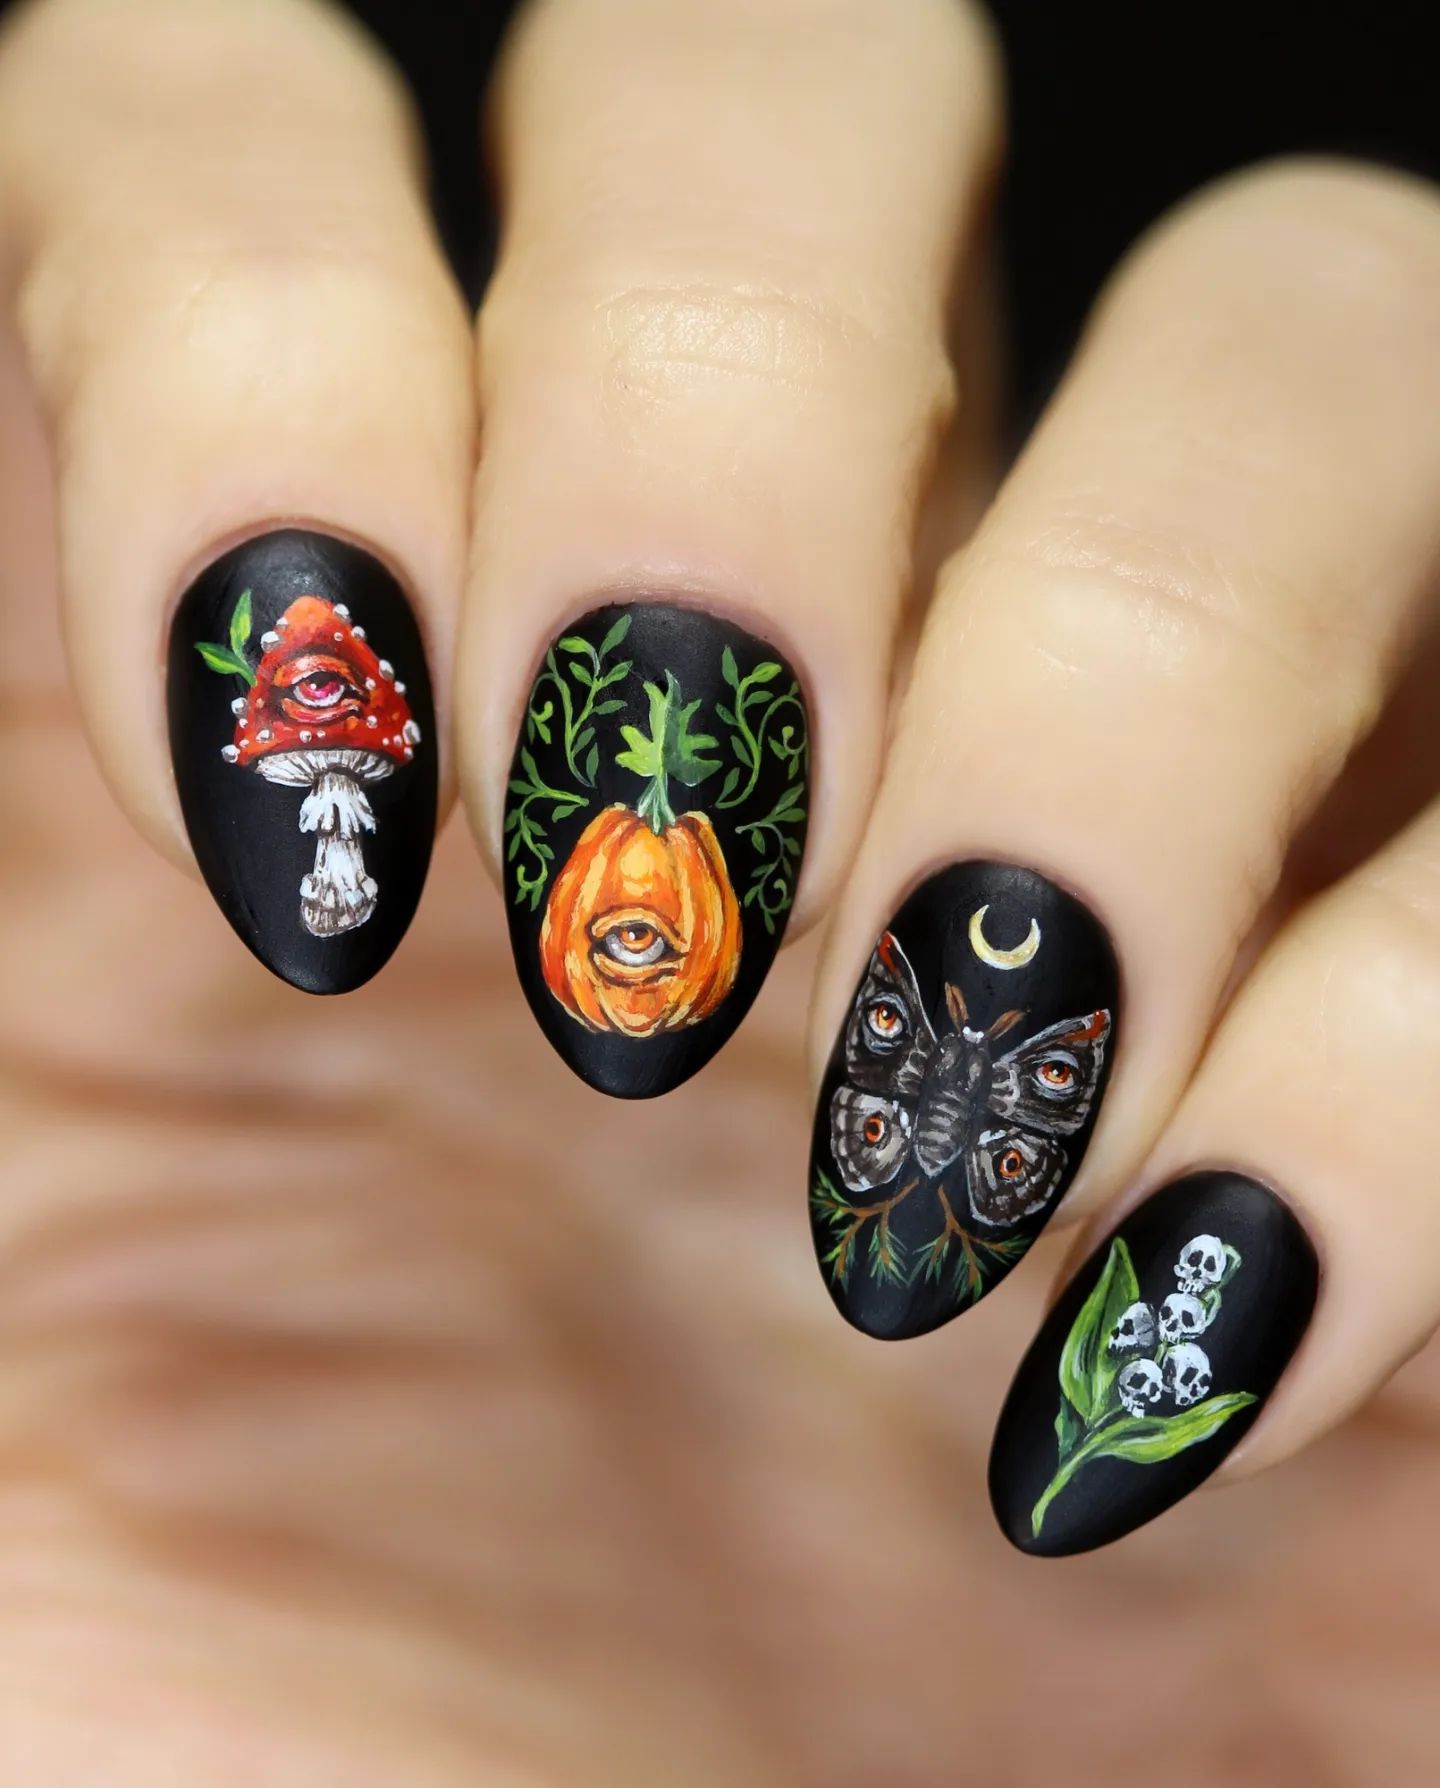 It is so hard not to be blown away! Just look at these incredible handprinted nails. The skulls, mushroom, pumpkin and butterfly details make this matte black nails totally amazing.